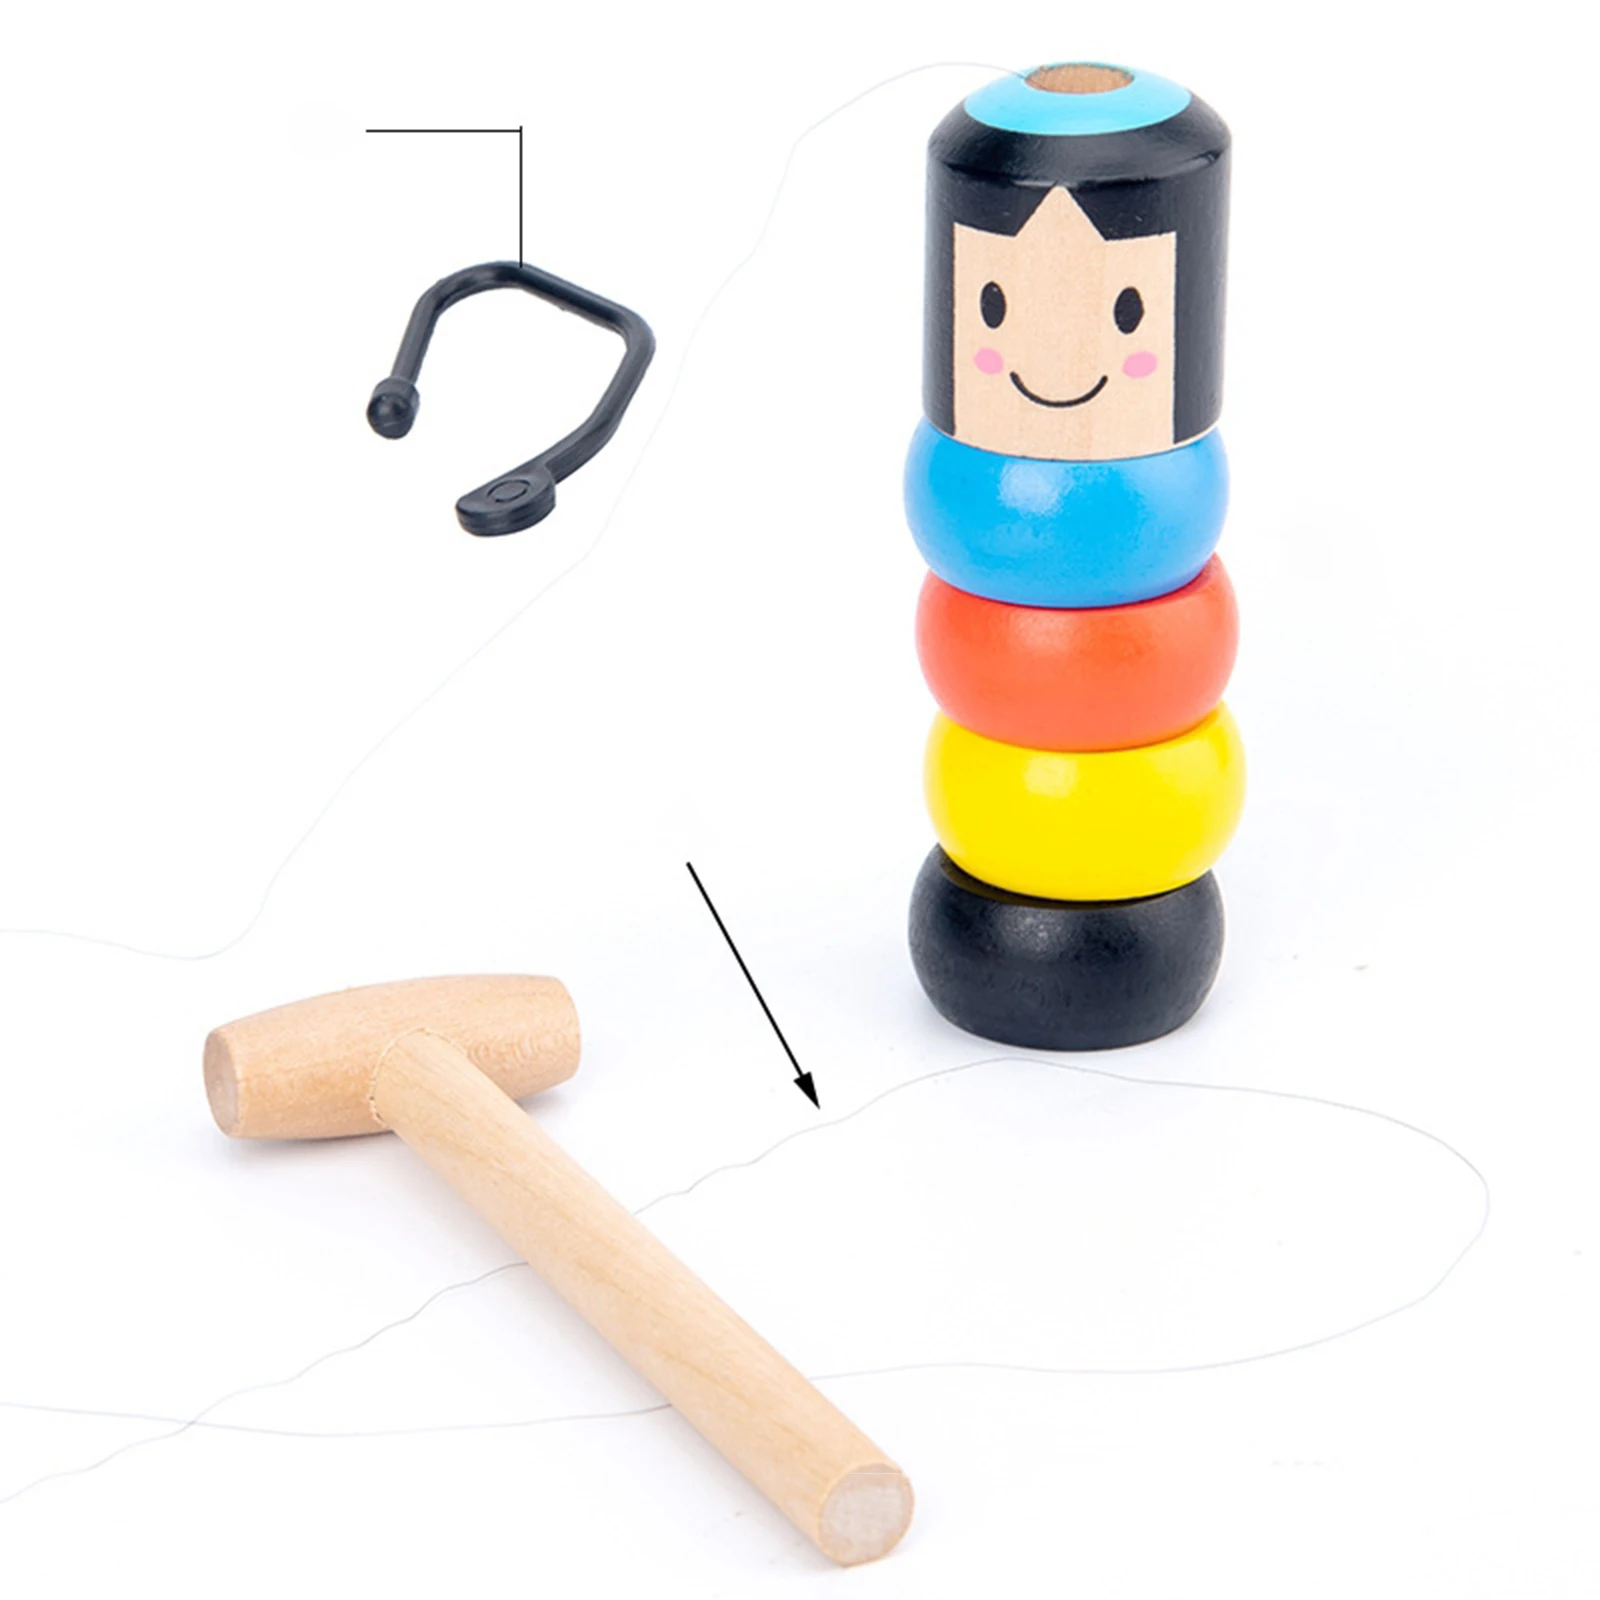 Immortal Wooden Man Magic toy Stubborn tumbler Stage Trick Props Gifts Christmas